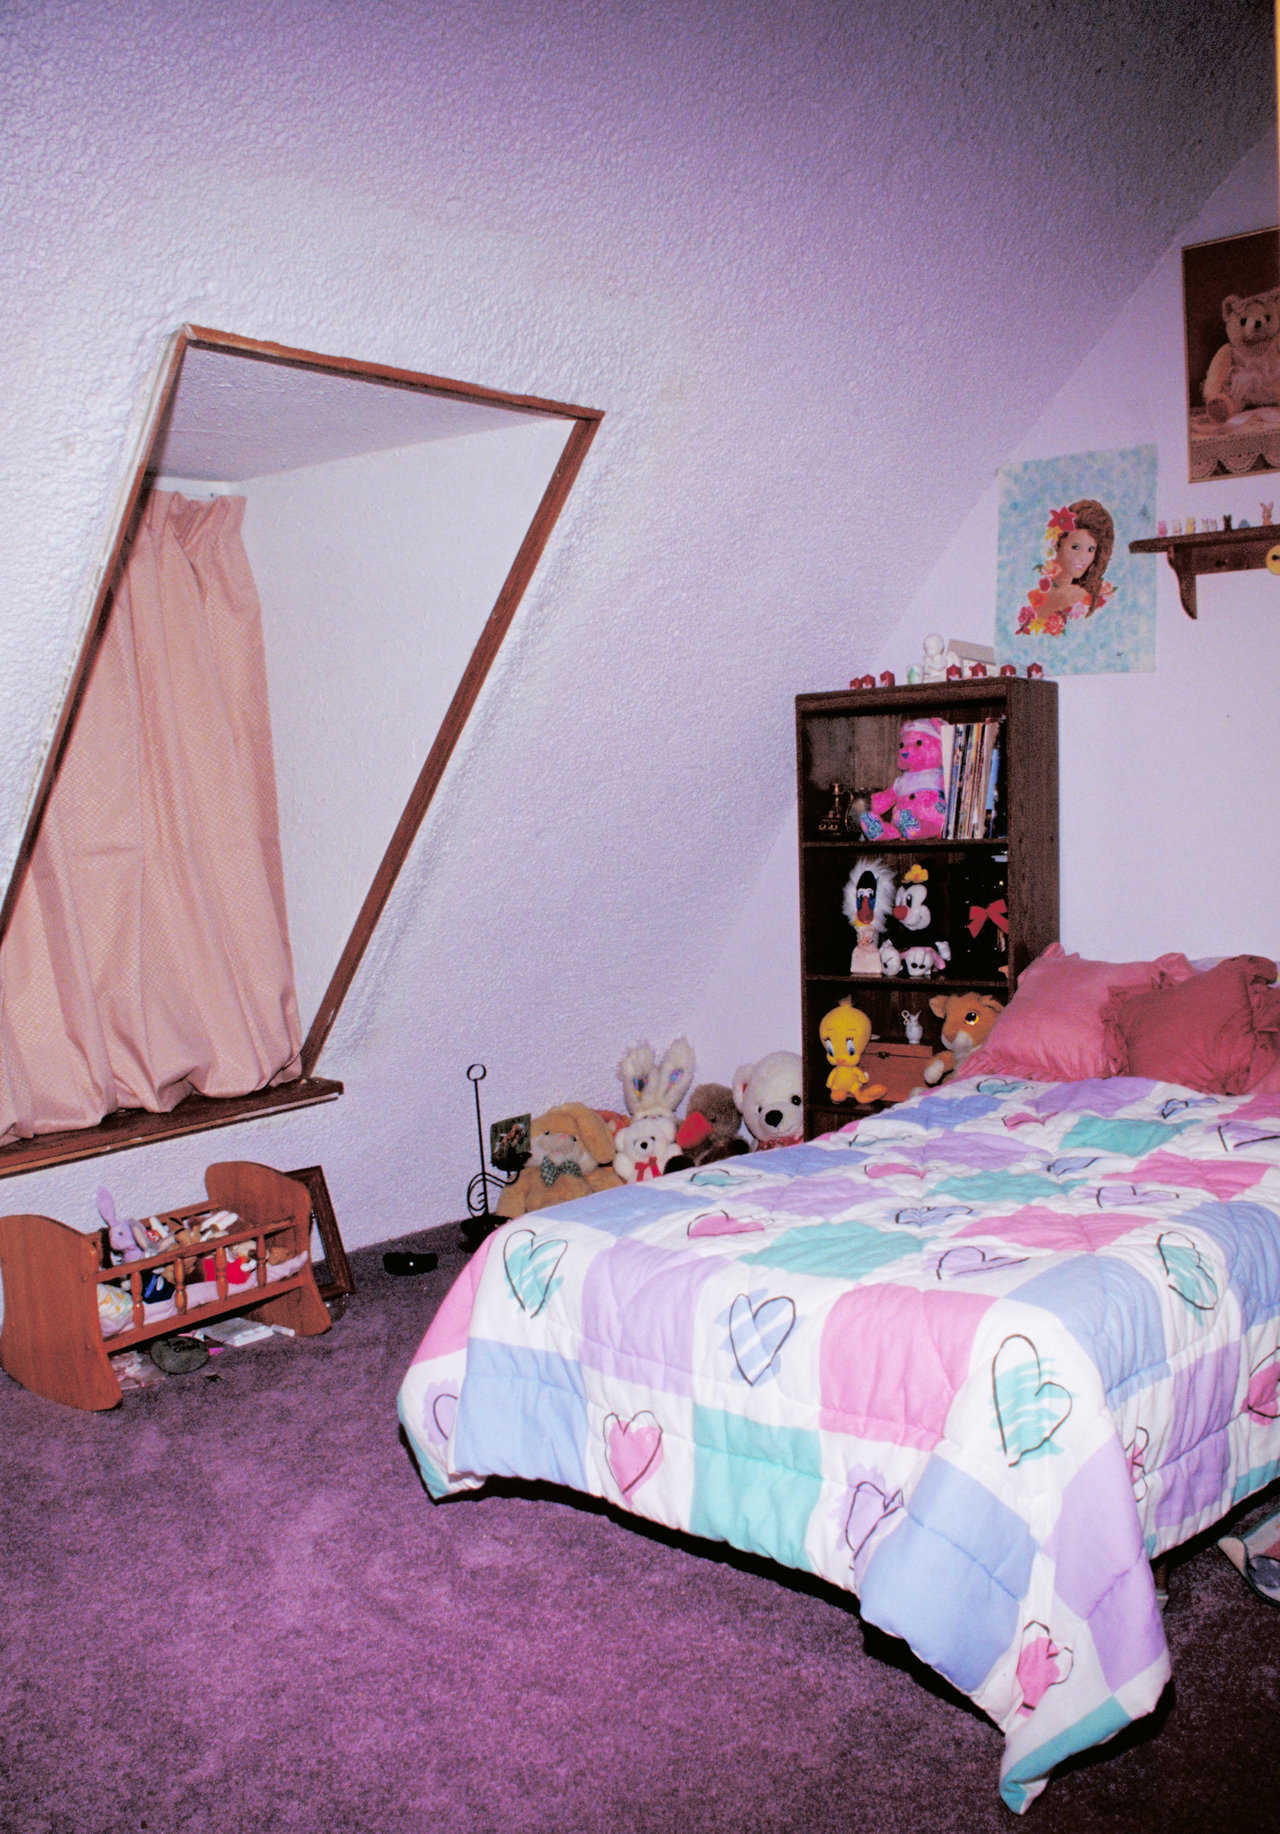 Pink! — It’s a girl’s bedroom — no doubt about that!